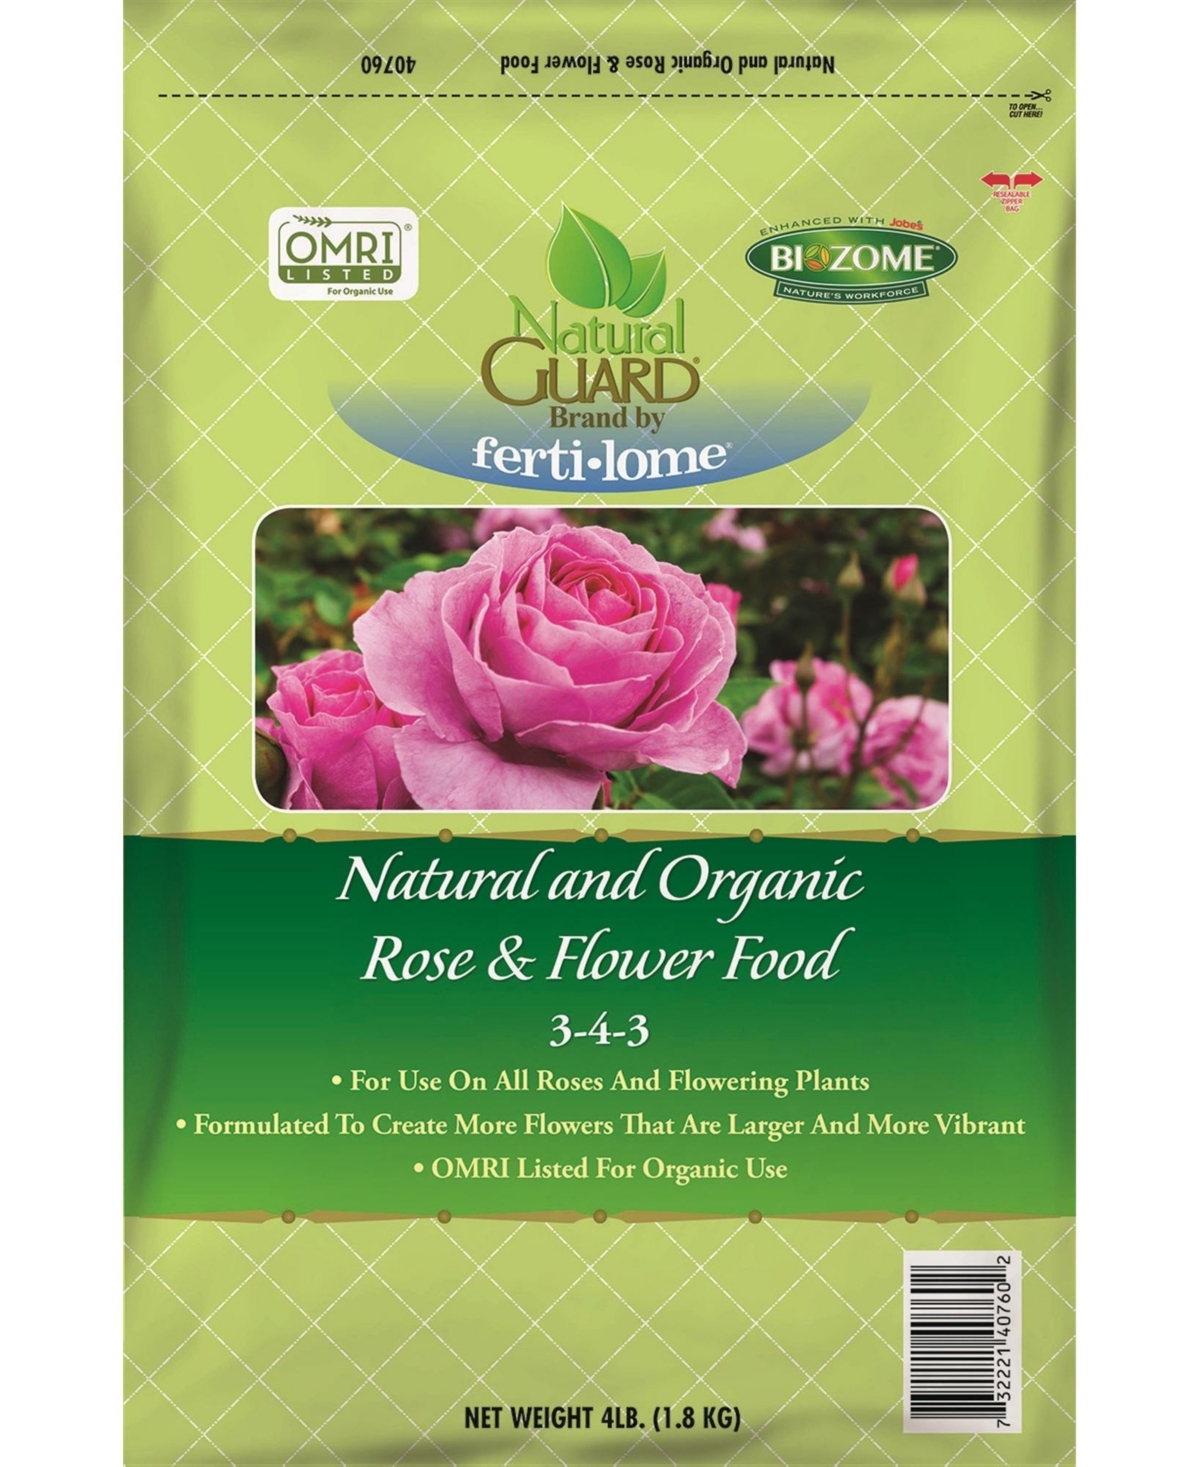 Natural Guard Natural Rose and Flower Food 3-4-3, 4lbs - Open Misce